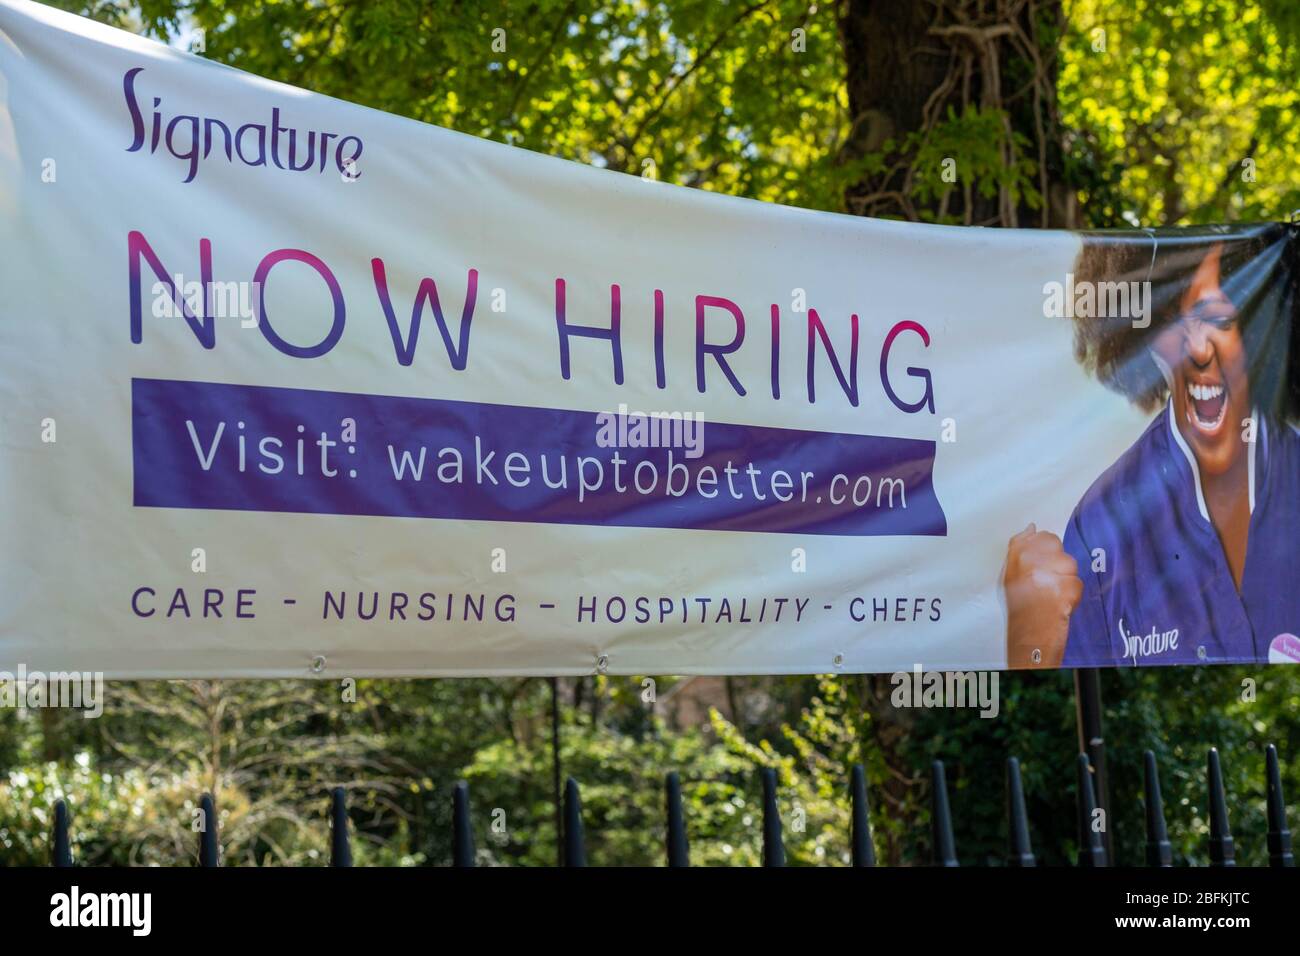 Care homes Brentwood Essex UK, The Beeches senior living and care home, Now hiring sign for care staff, wakeuptobetter sign, Stock Photo